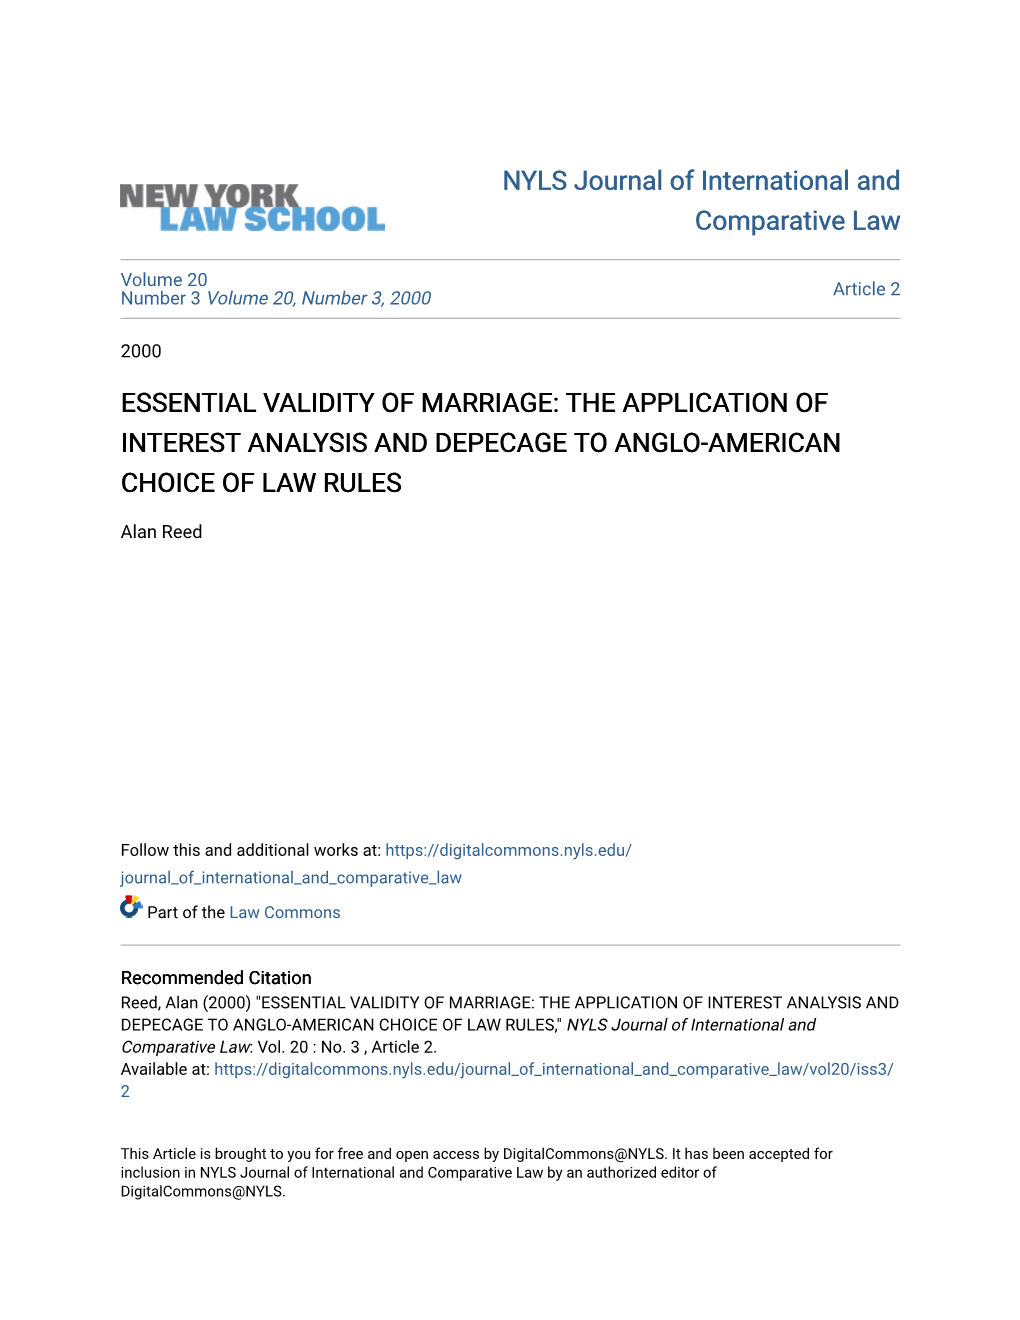 Essential Validity of Marriage: the Application of Interest Analysis and Depecage to Anglo-American Choice of Law Rules